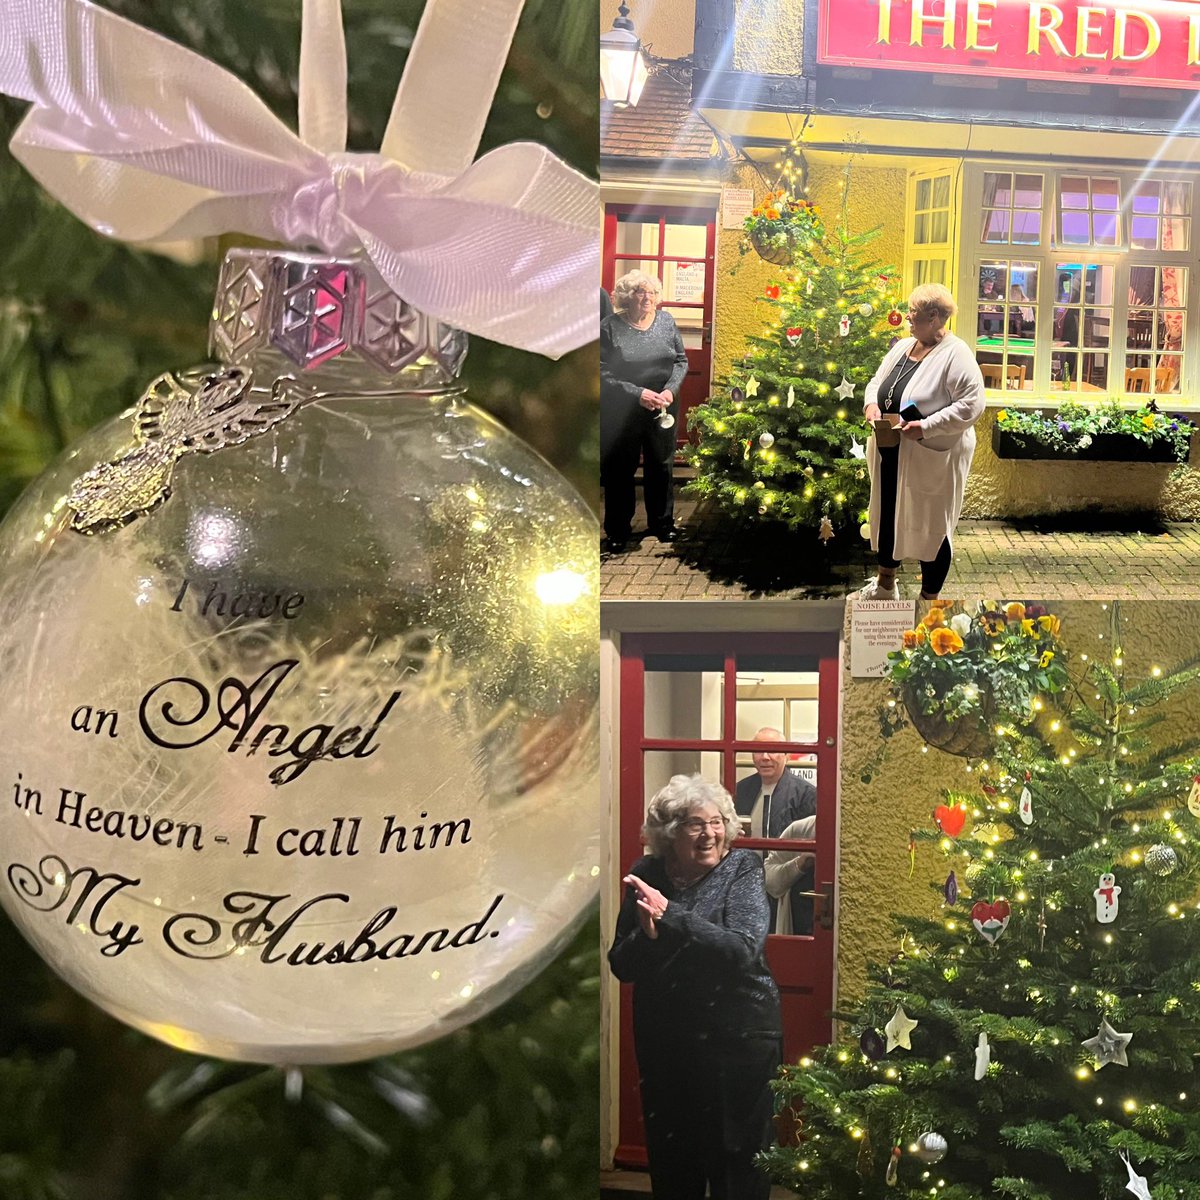 At the age of 85 and having lived in the village for 53 years the MiL turns on the Christmas lights at Wilstead’s Red Lion…#rememberingErn